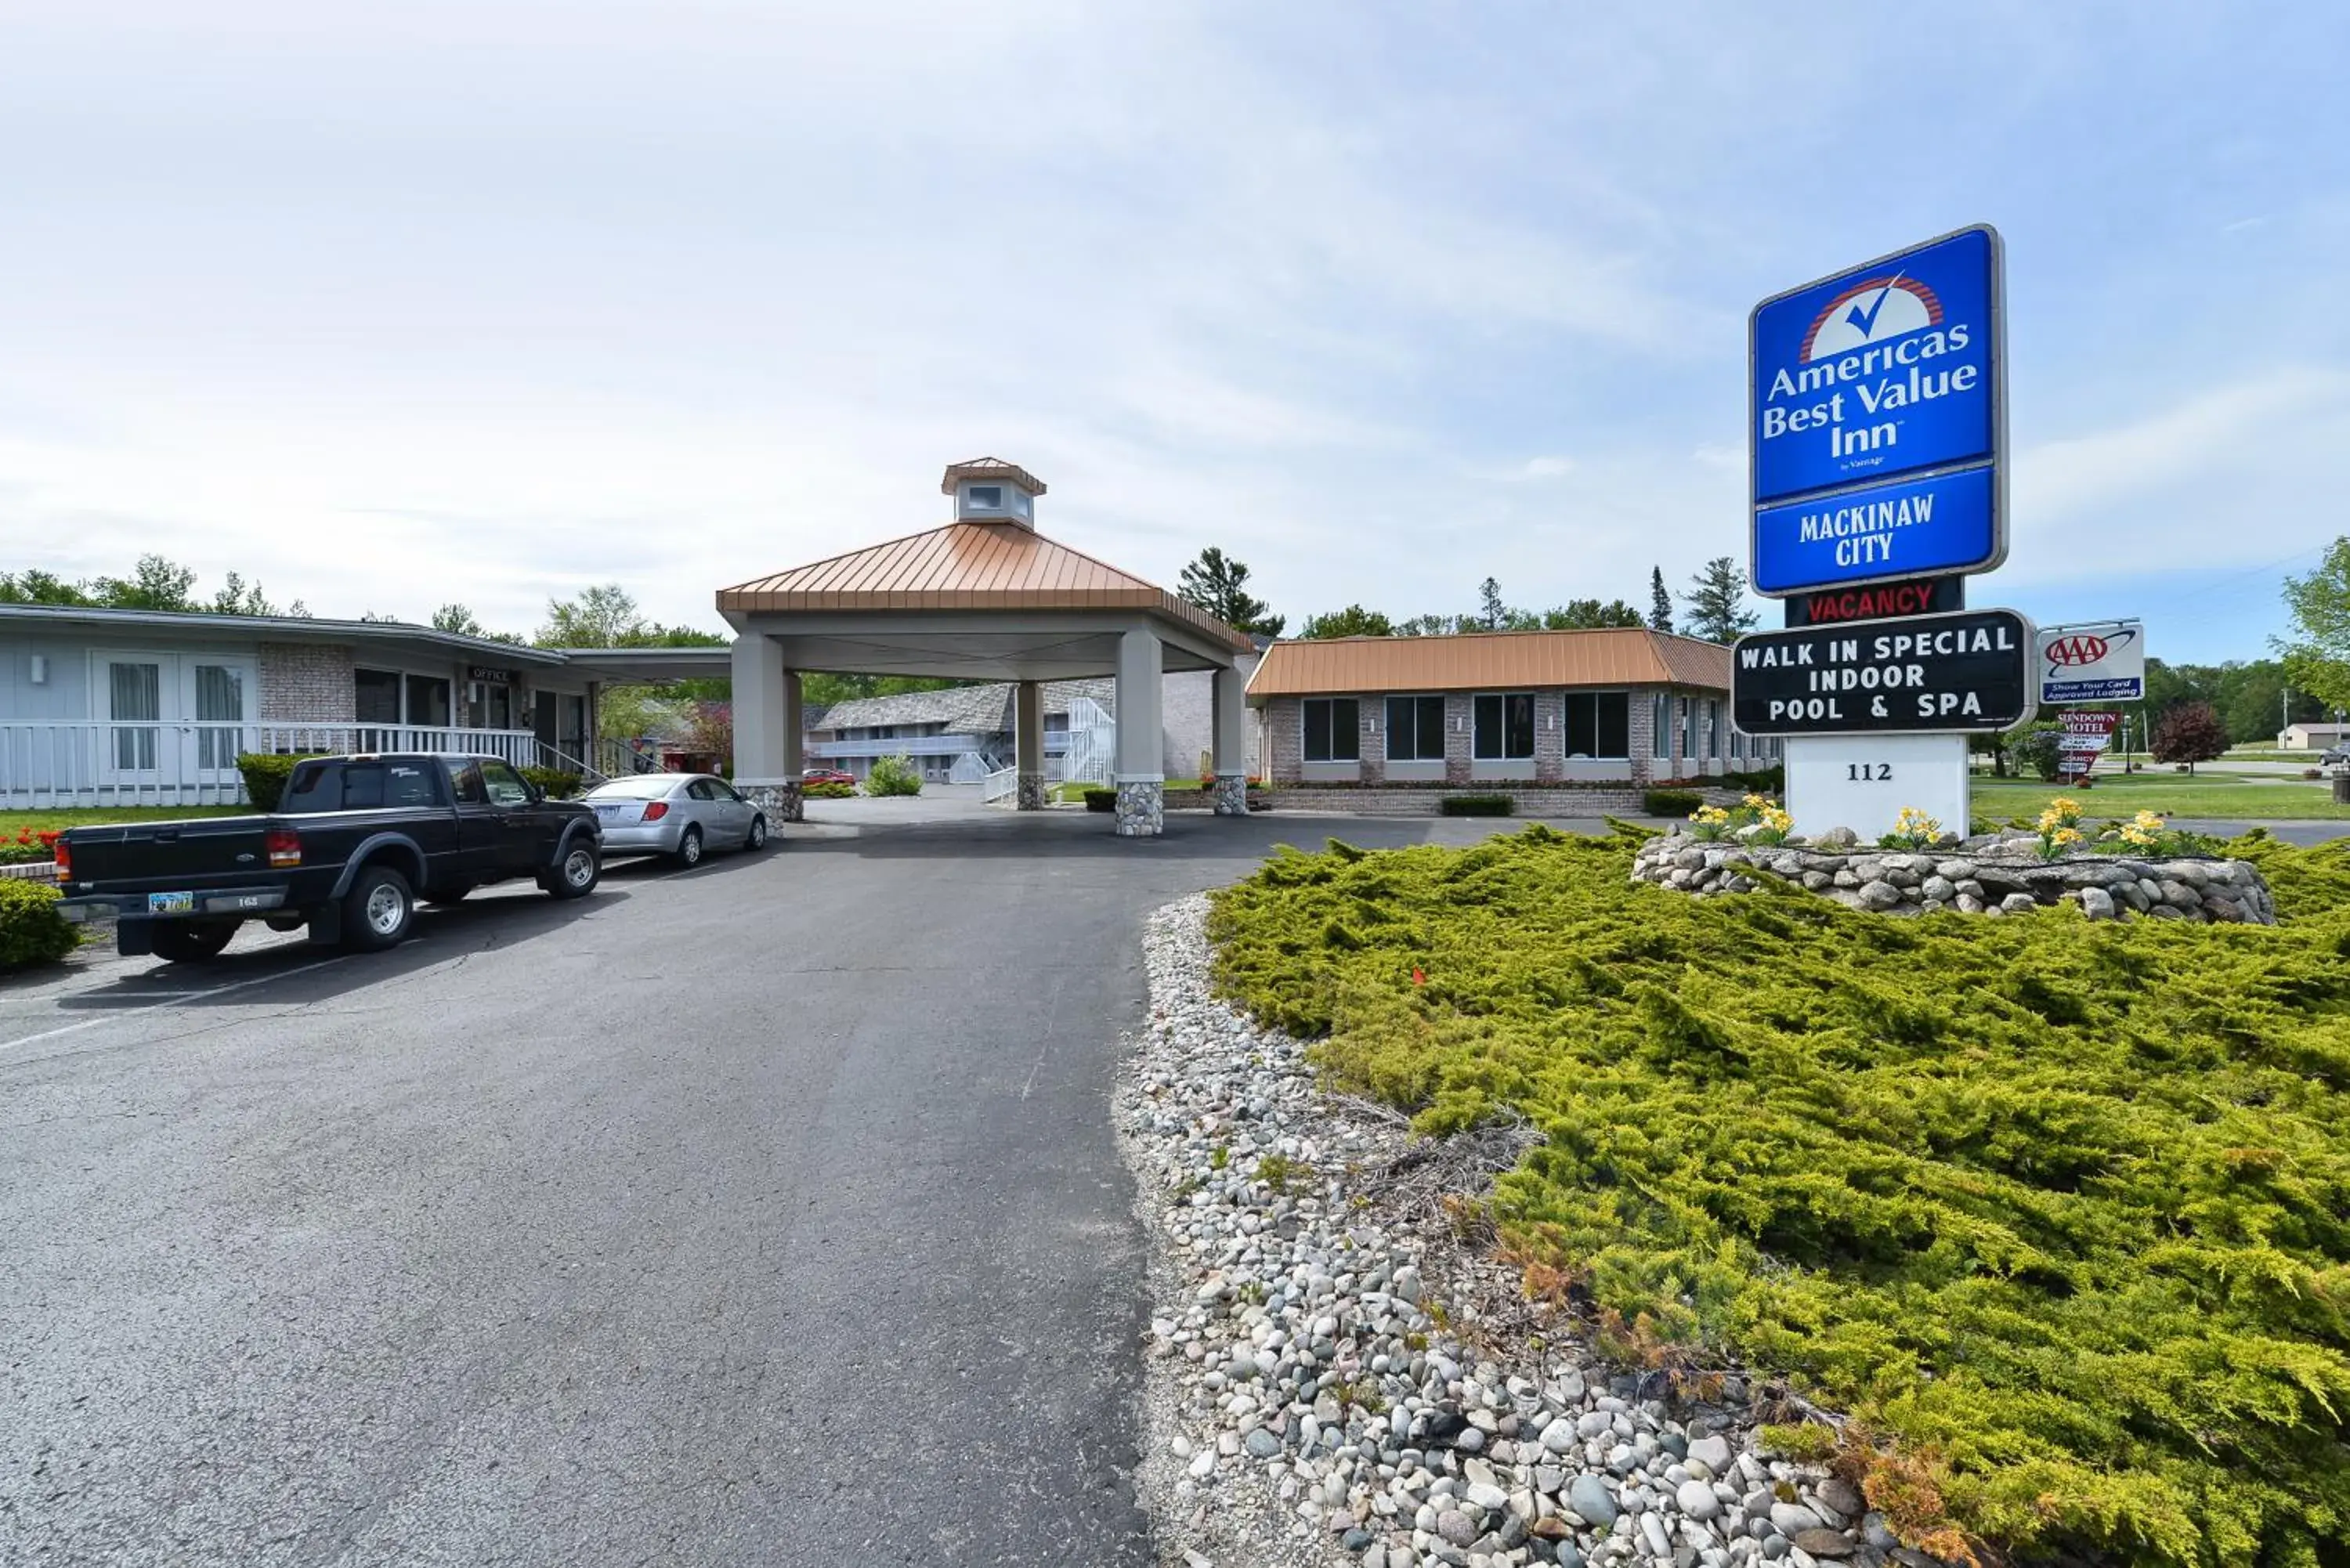 Facade/entrance, Property Building in Americas Best Value Inn Mackinaw City